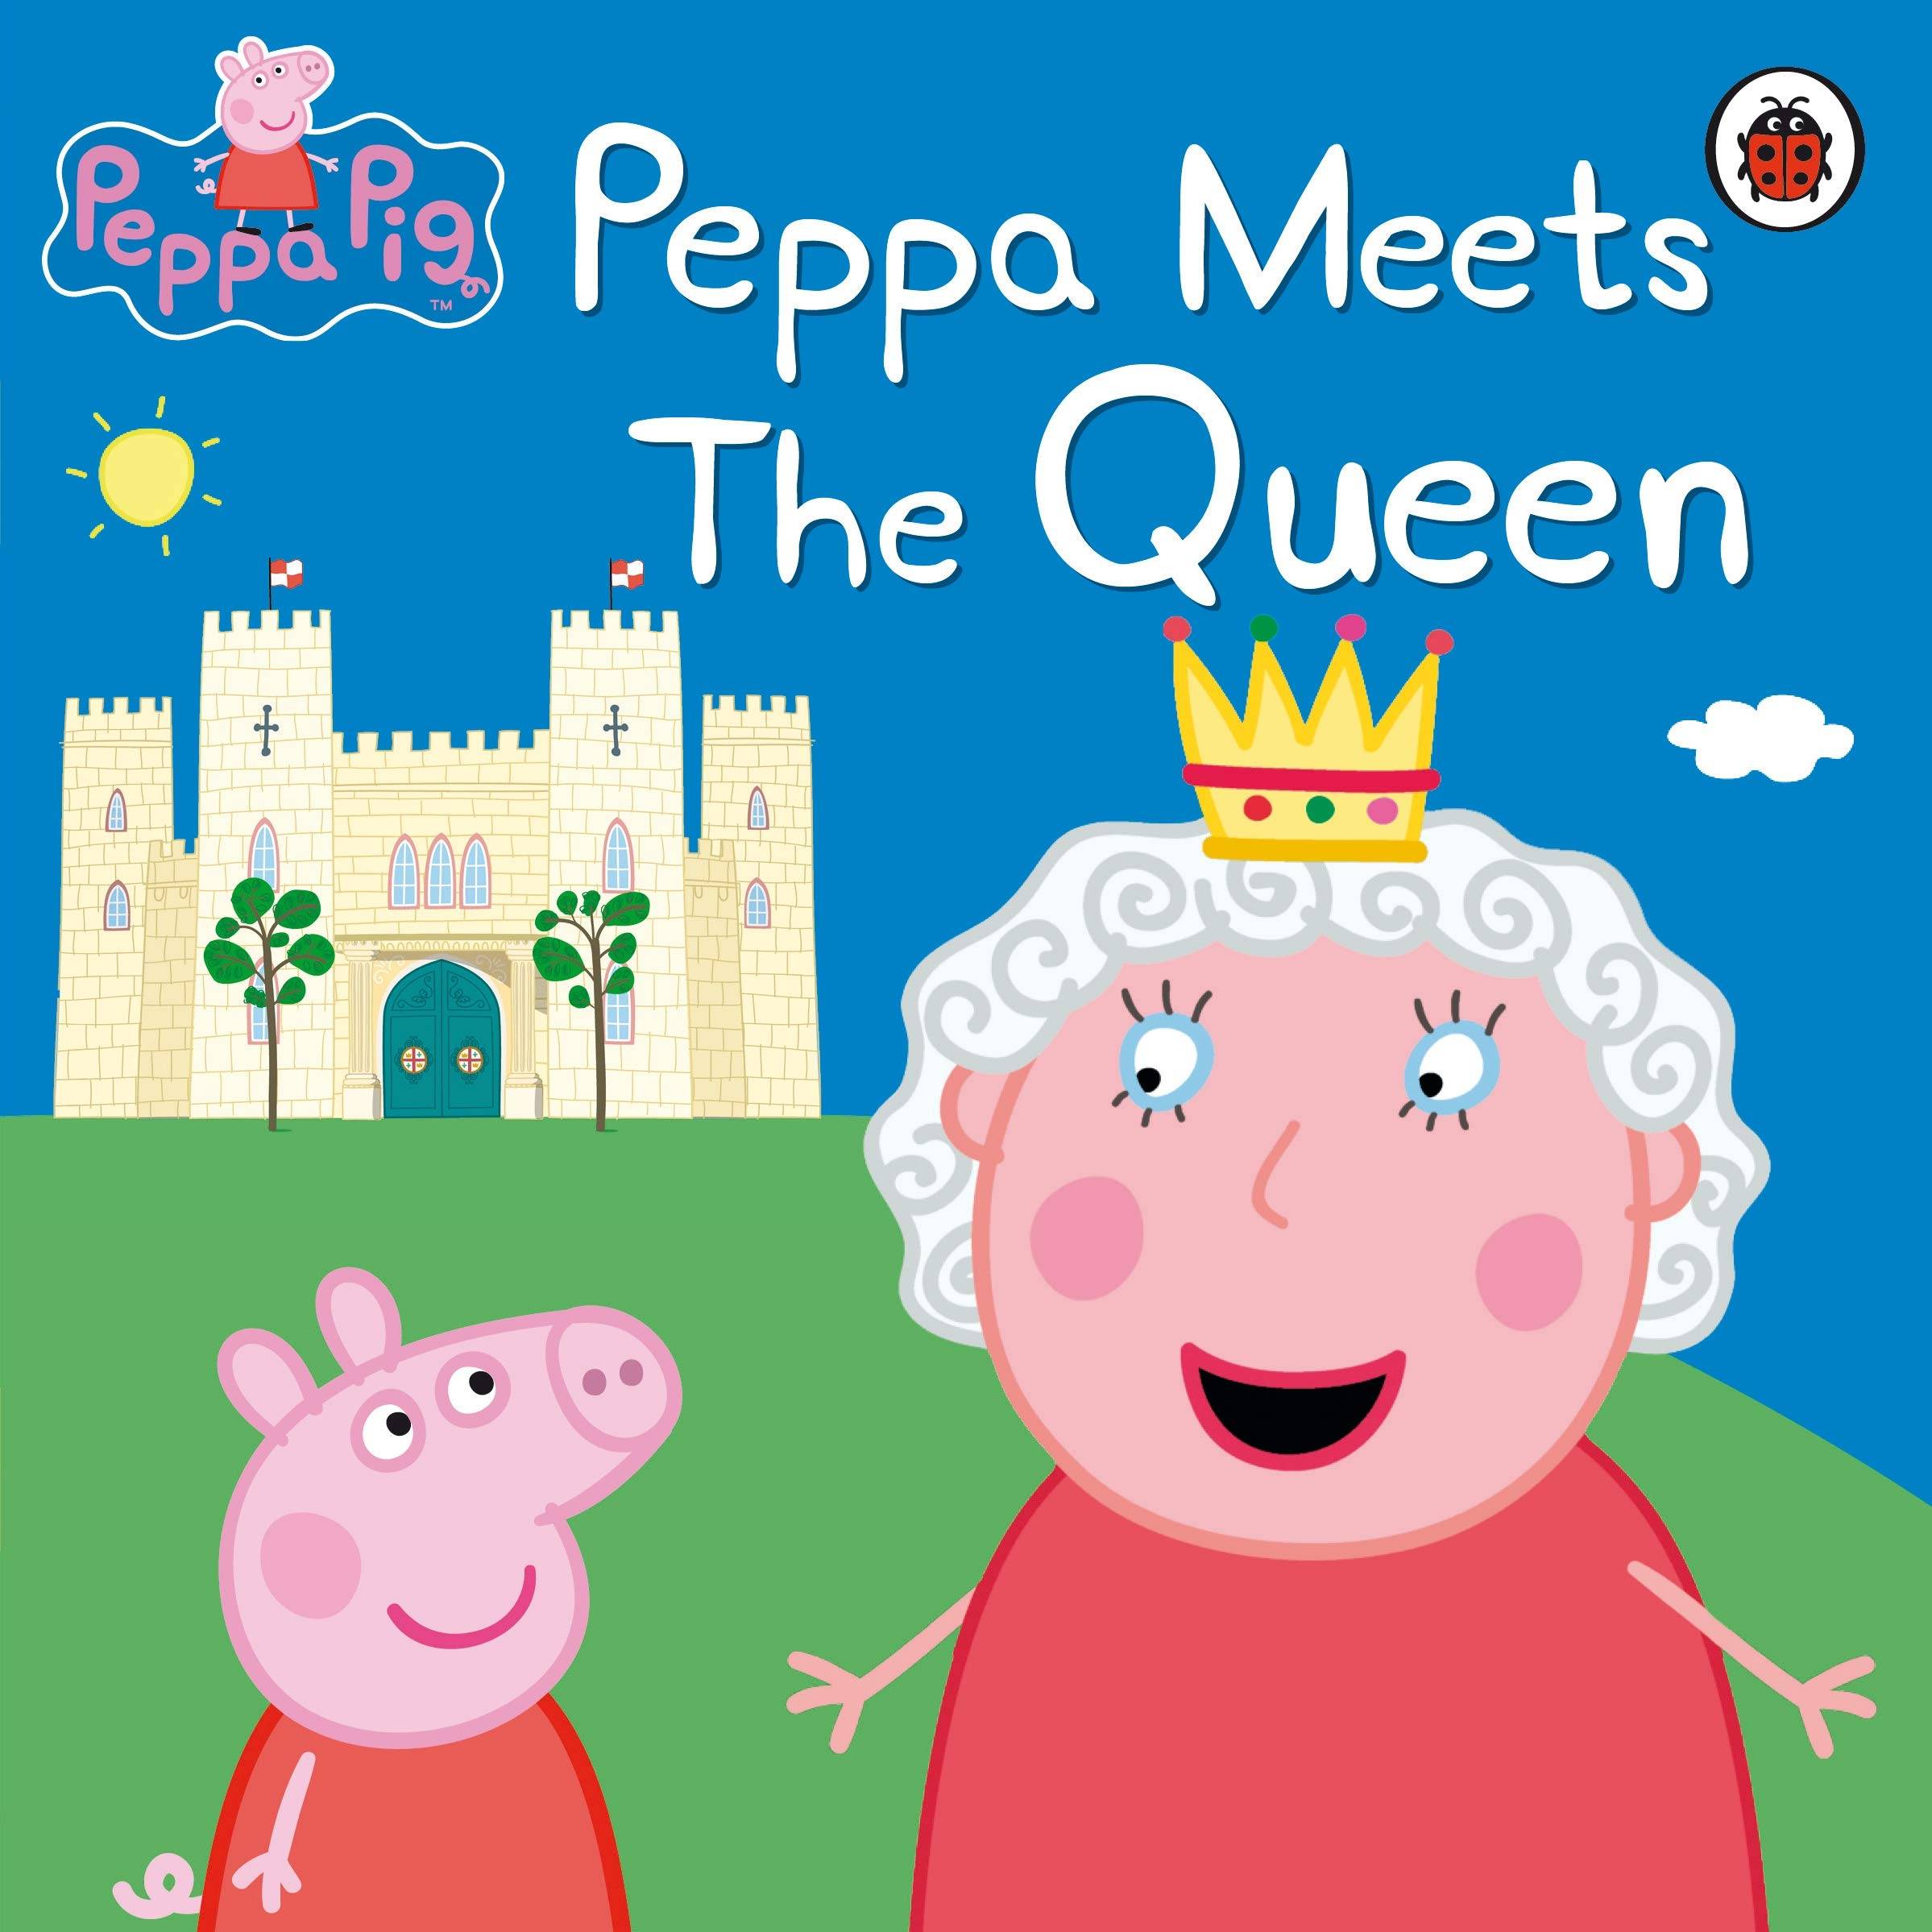 IMG : Peppa Meets the Queen